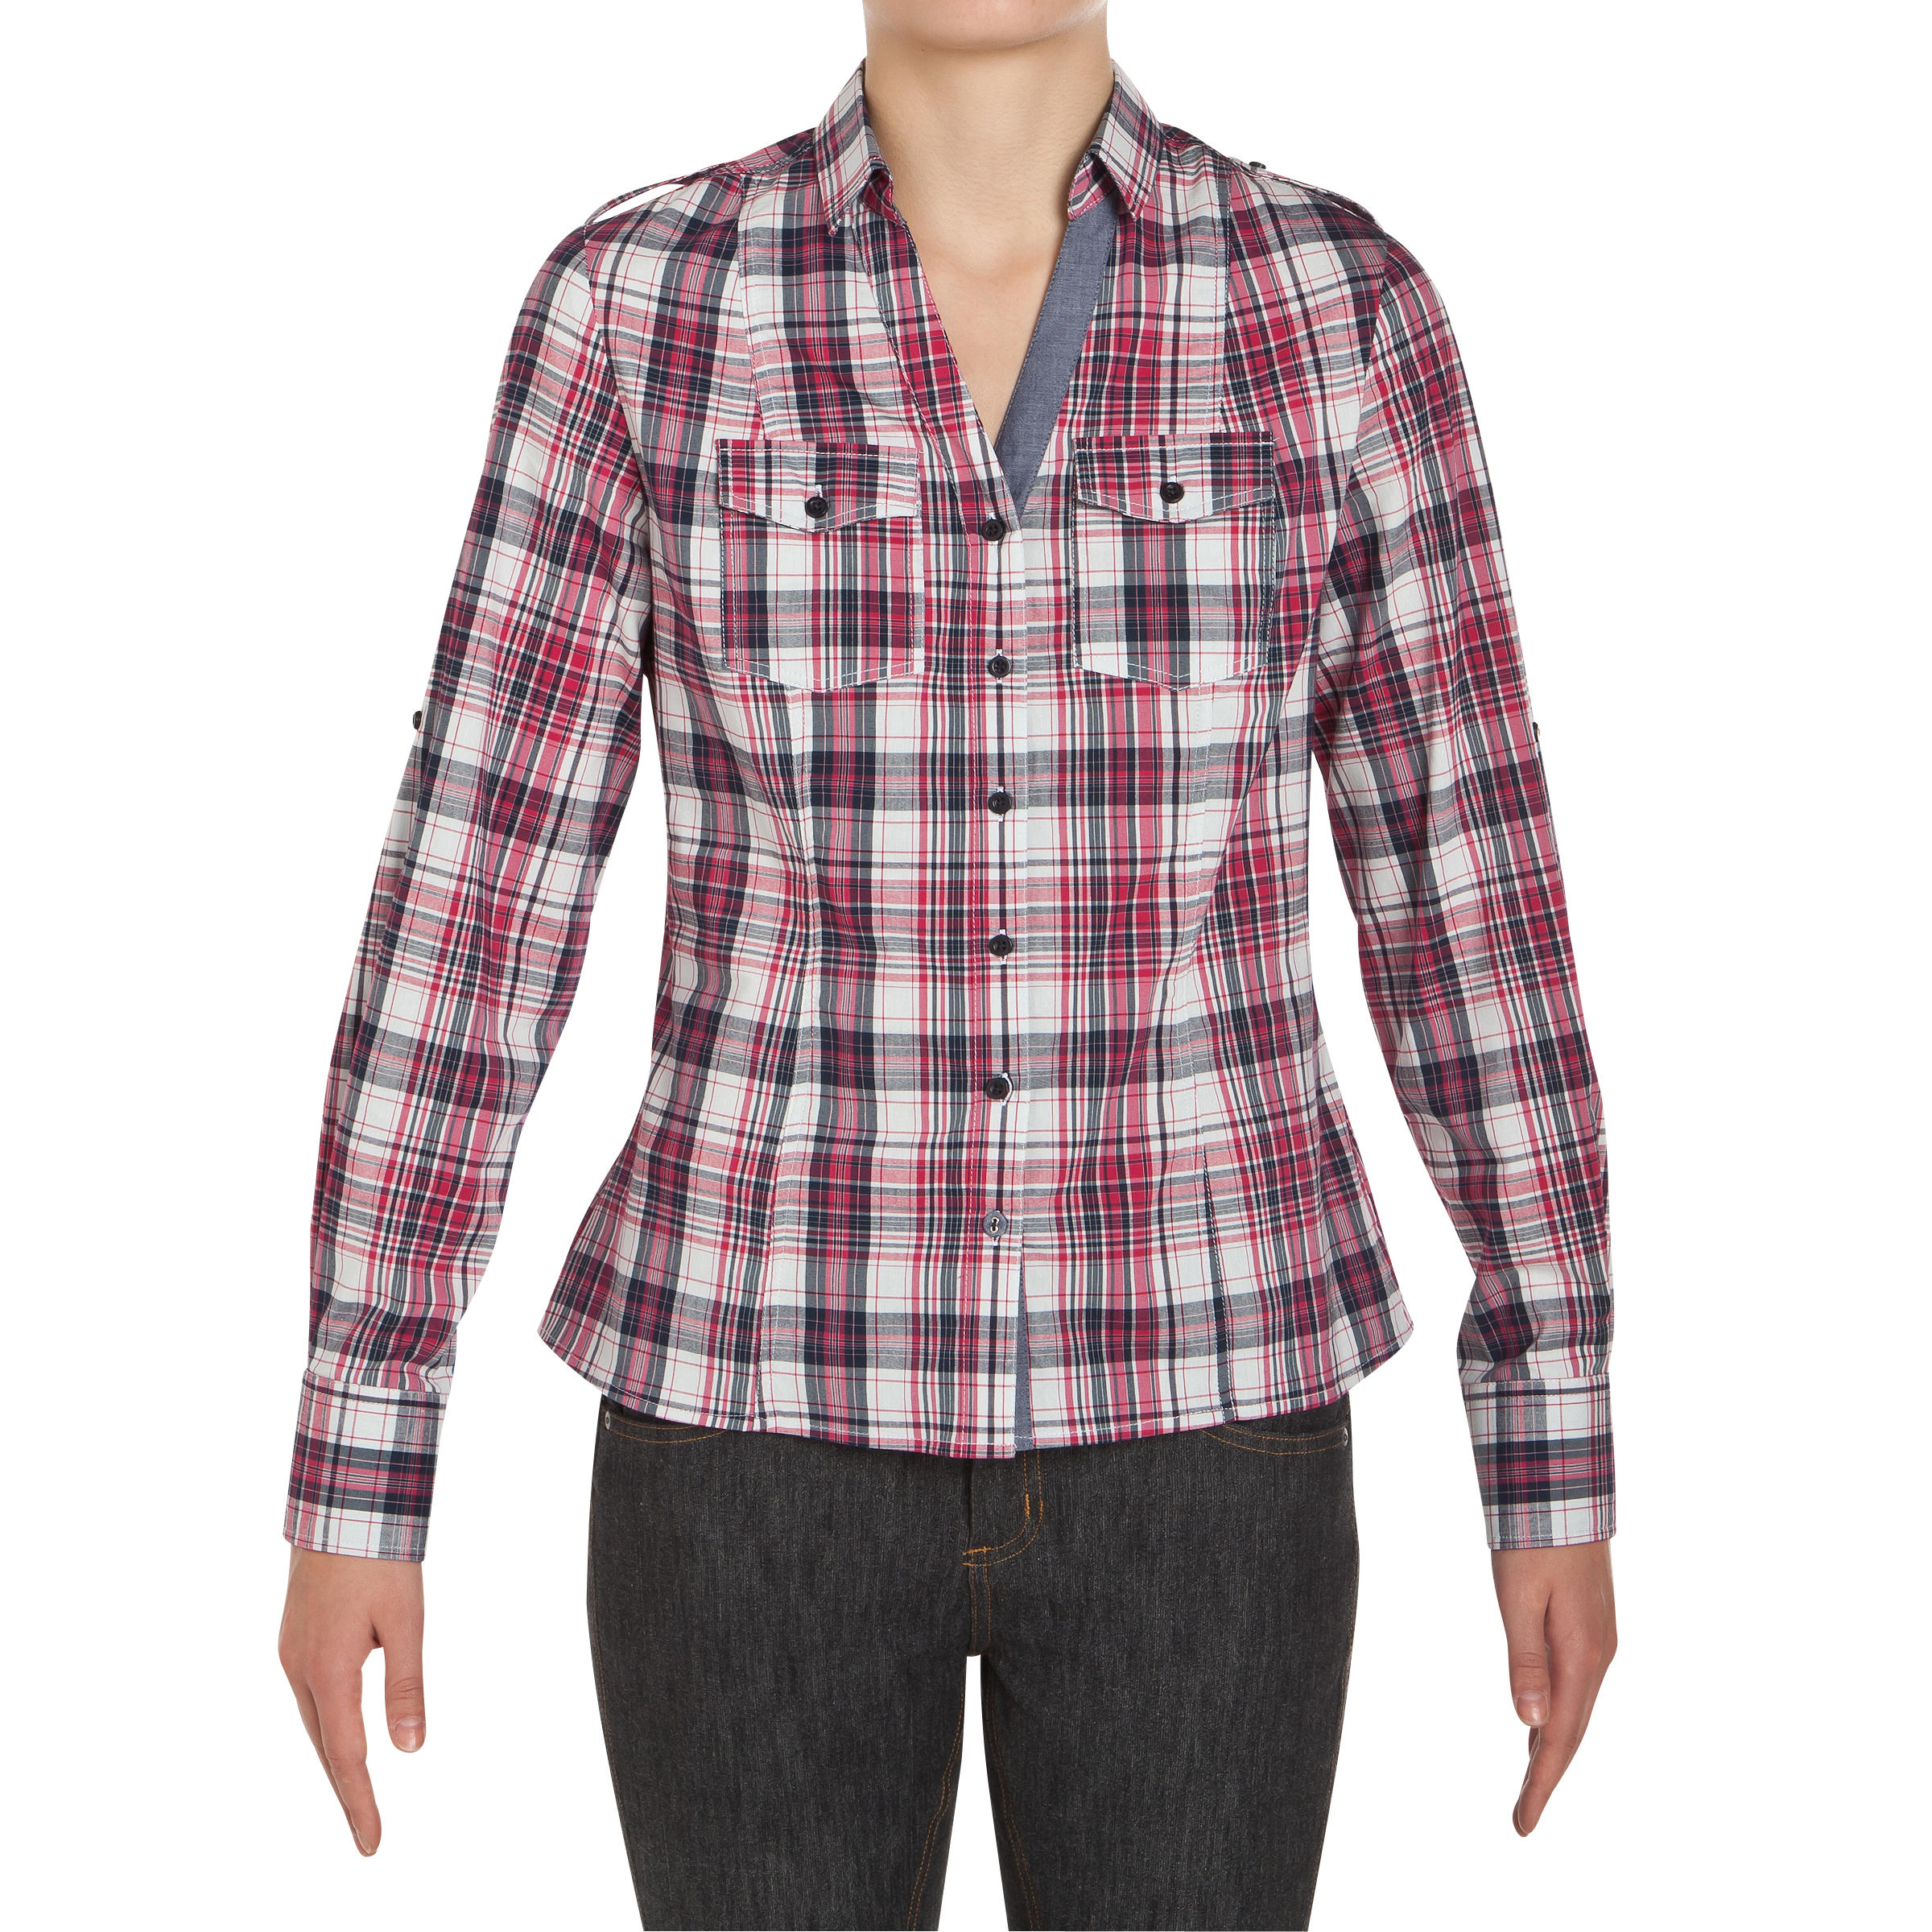 Sentier Women's Long-Sleeved Horse Riding Shirt - Pink and White Checks 2/11